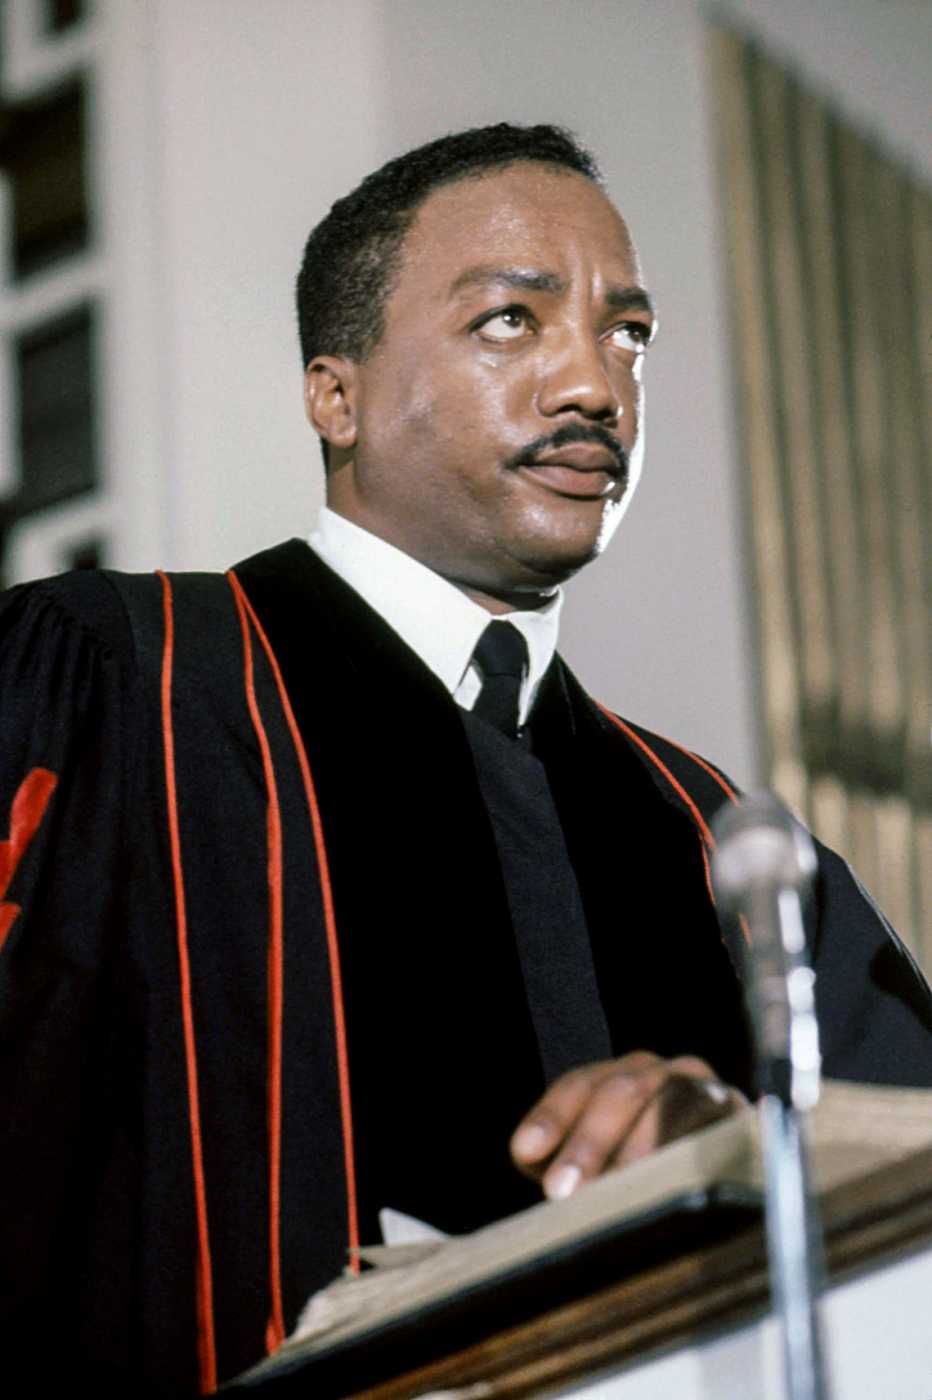 Paul Winfield stars as Martin Luther King Jr. in "King."